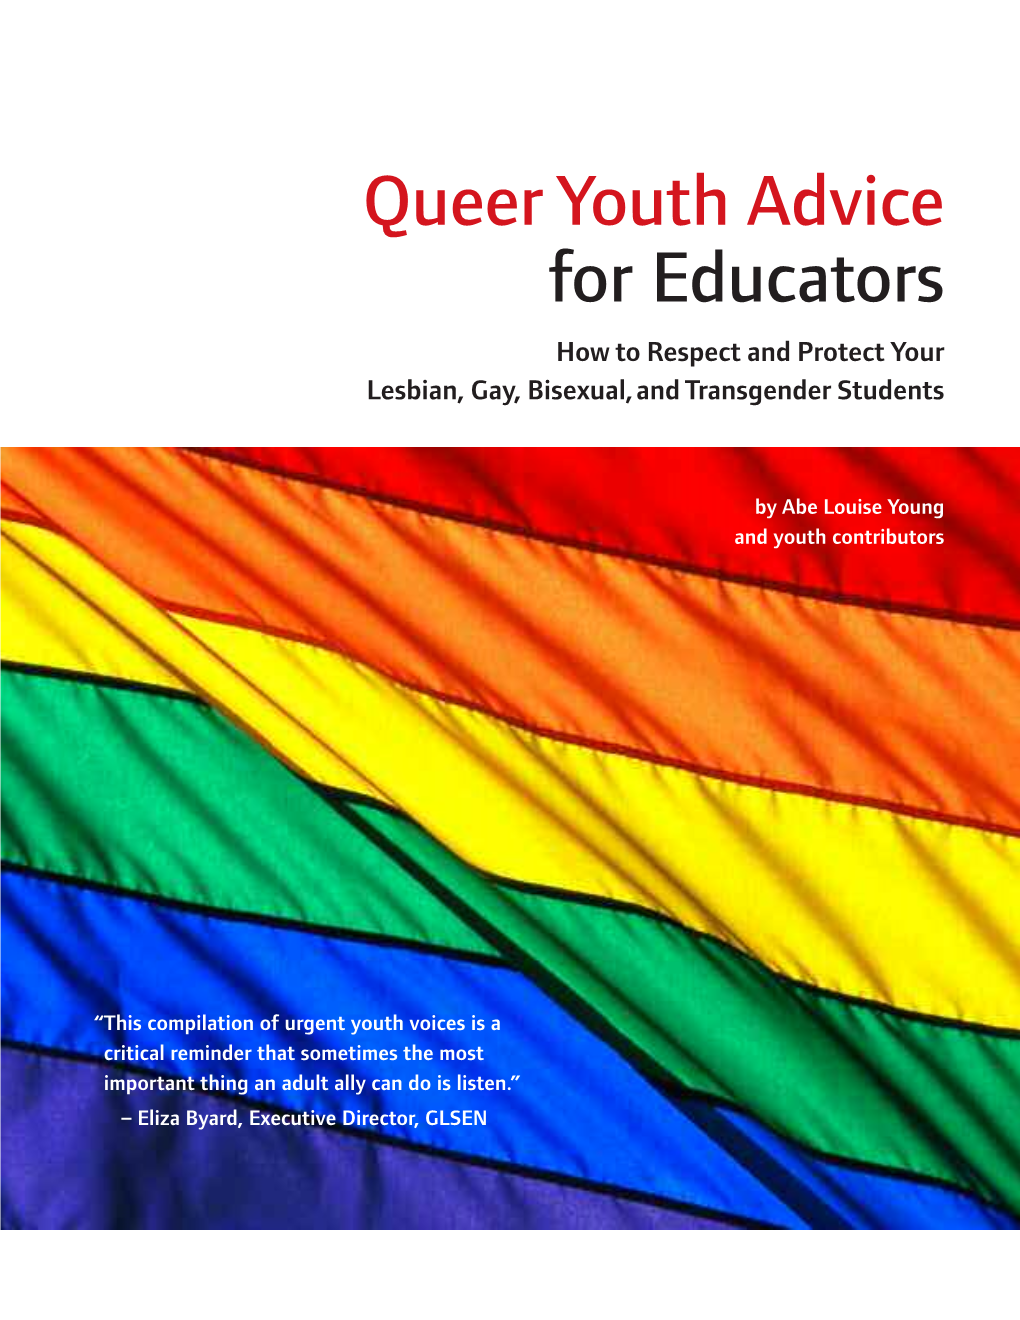 Queer Youth Advice for Educators